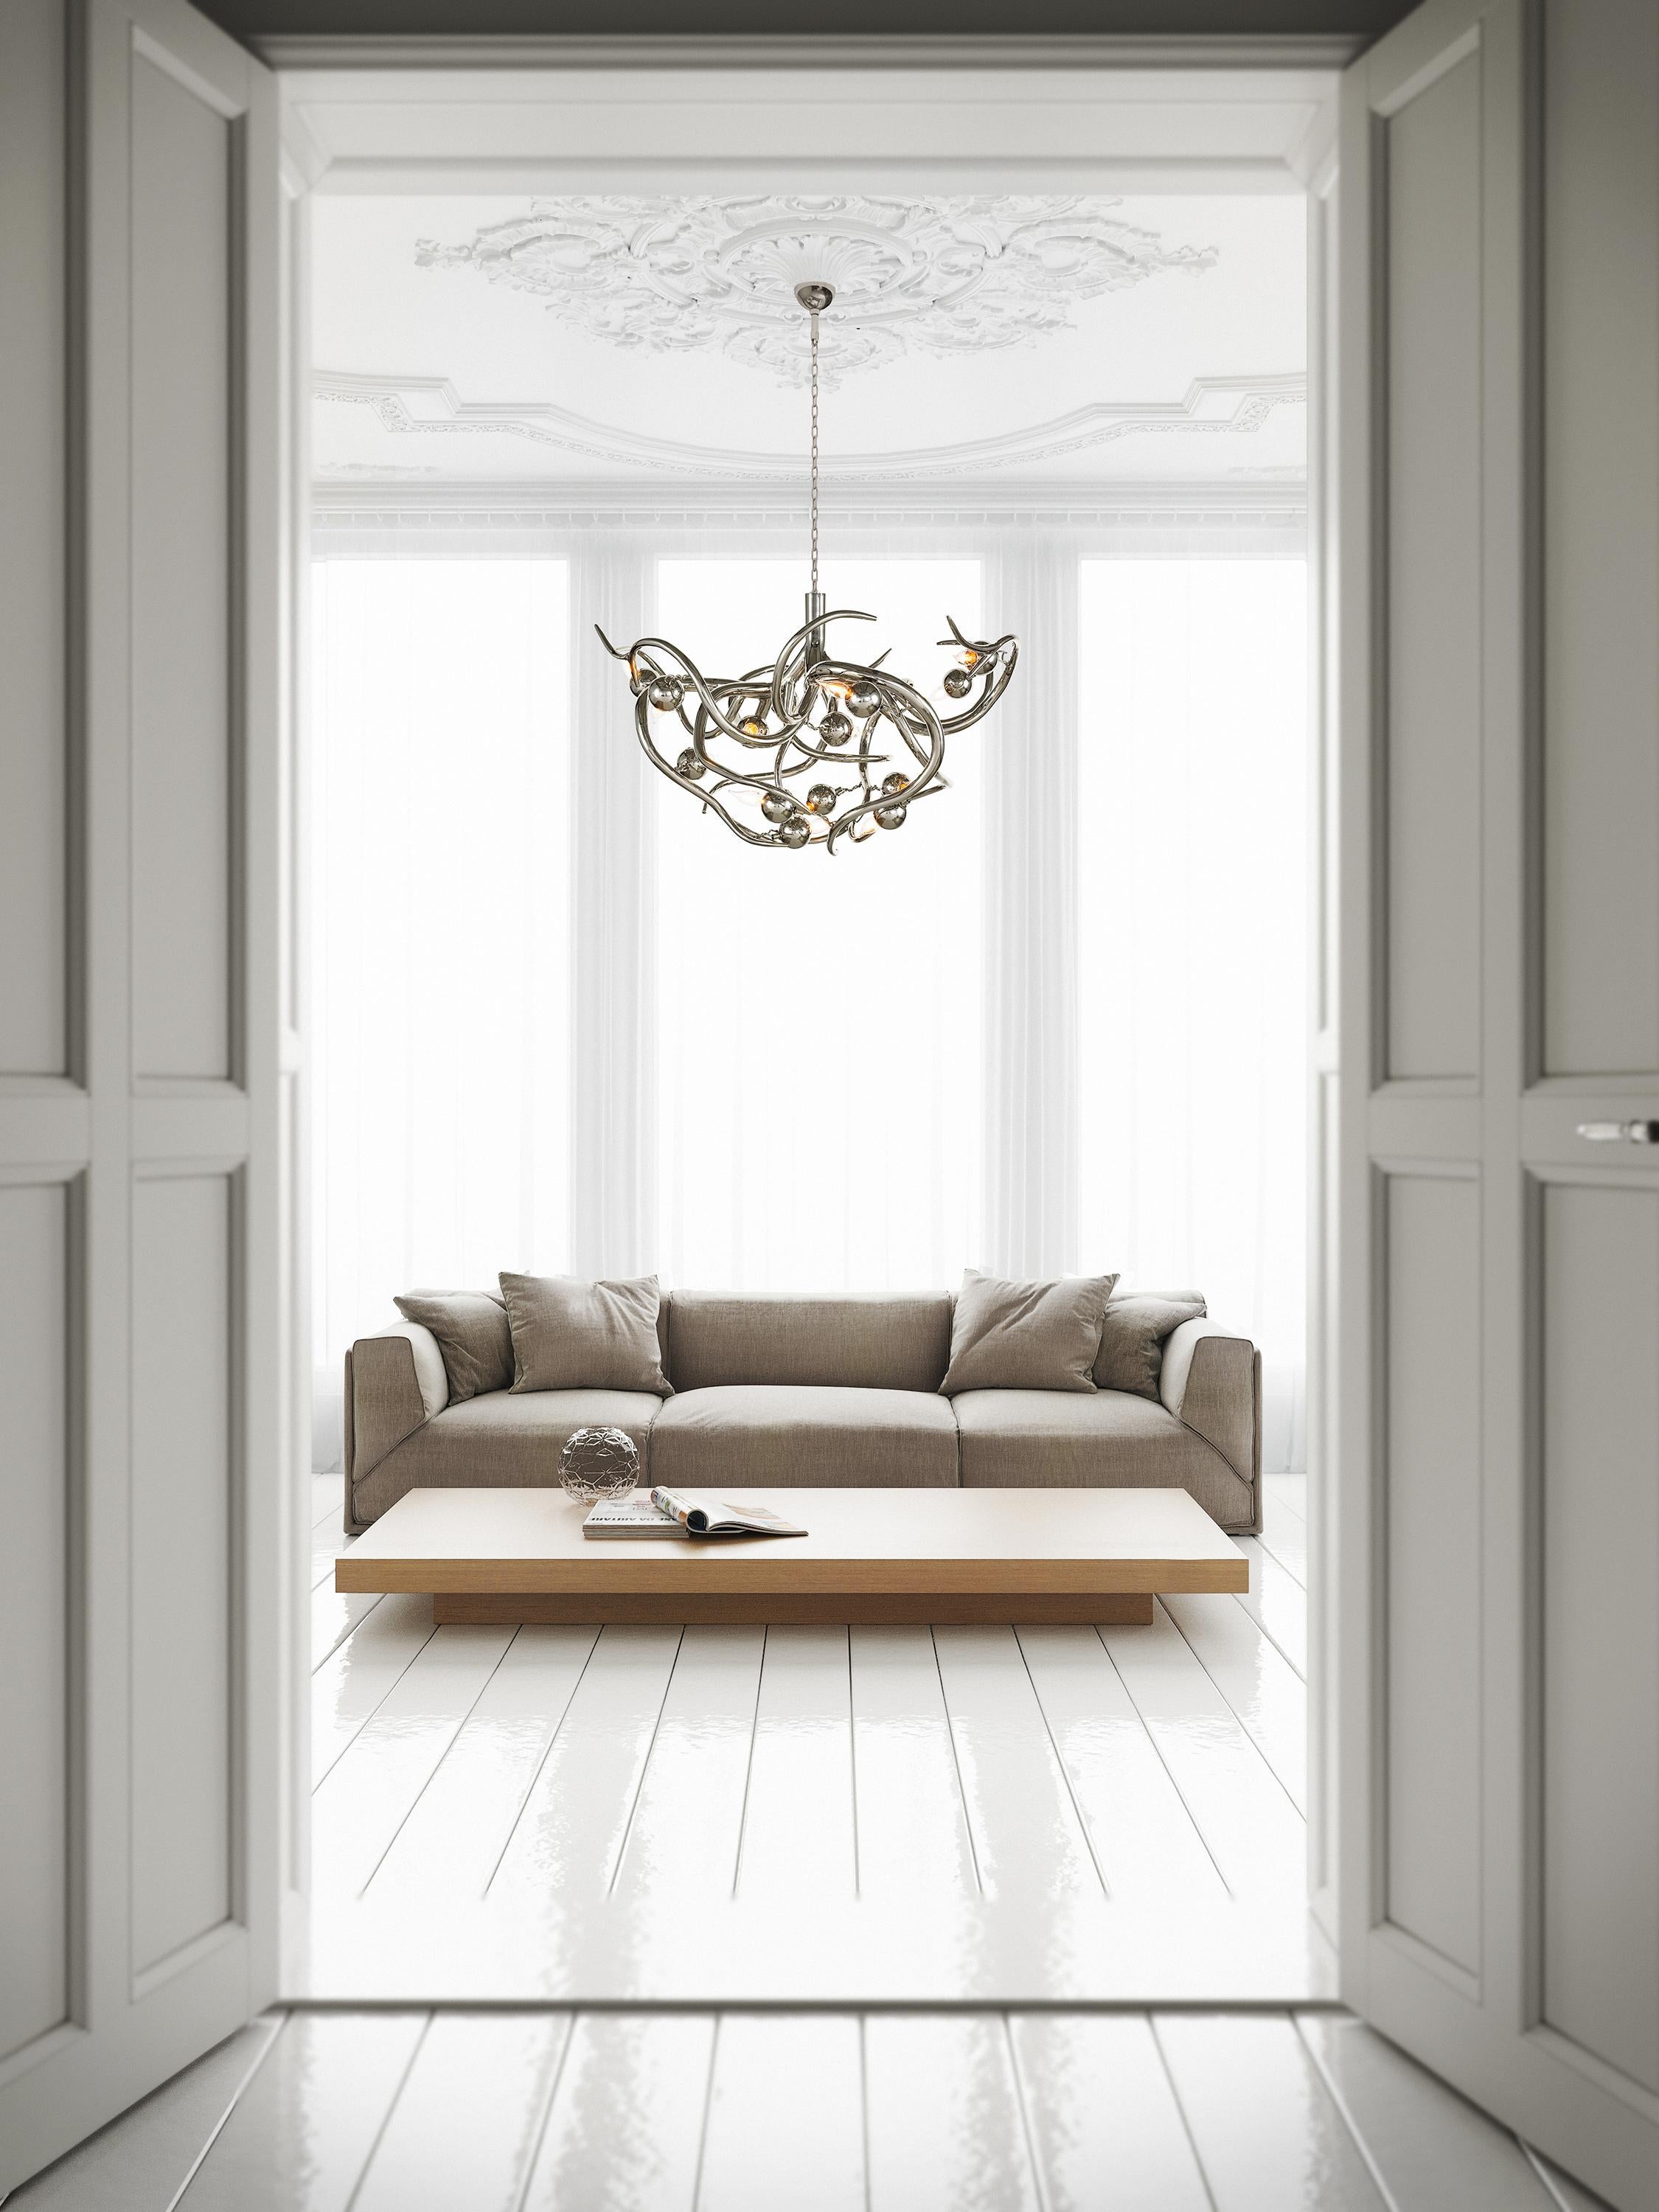 Dutch Modern Chandelier in a Nickel Finish - Eve Collection, by Brand van Egmond   For Sale